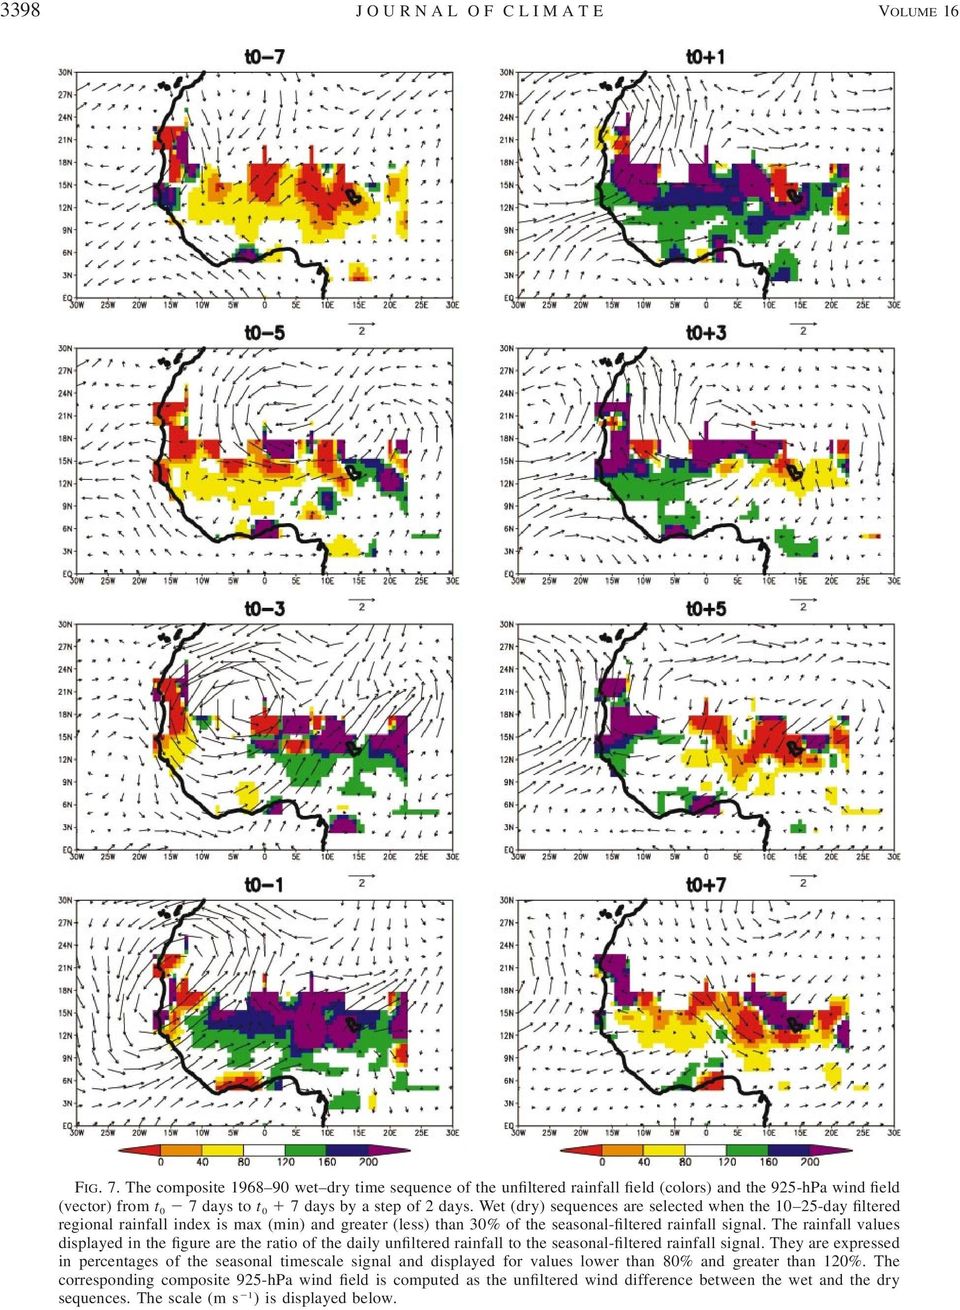 Wet (dry) sequences are selected when the 10 25-day filtered regional rainfall index is max (min) and greater (less) than 30% of the seasonal-filtered rainfall signal.